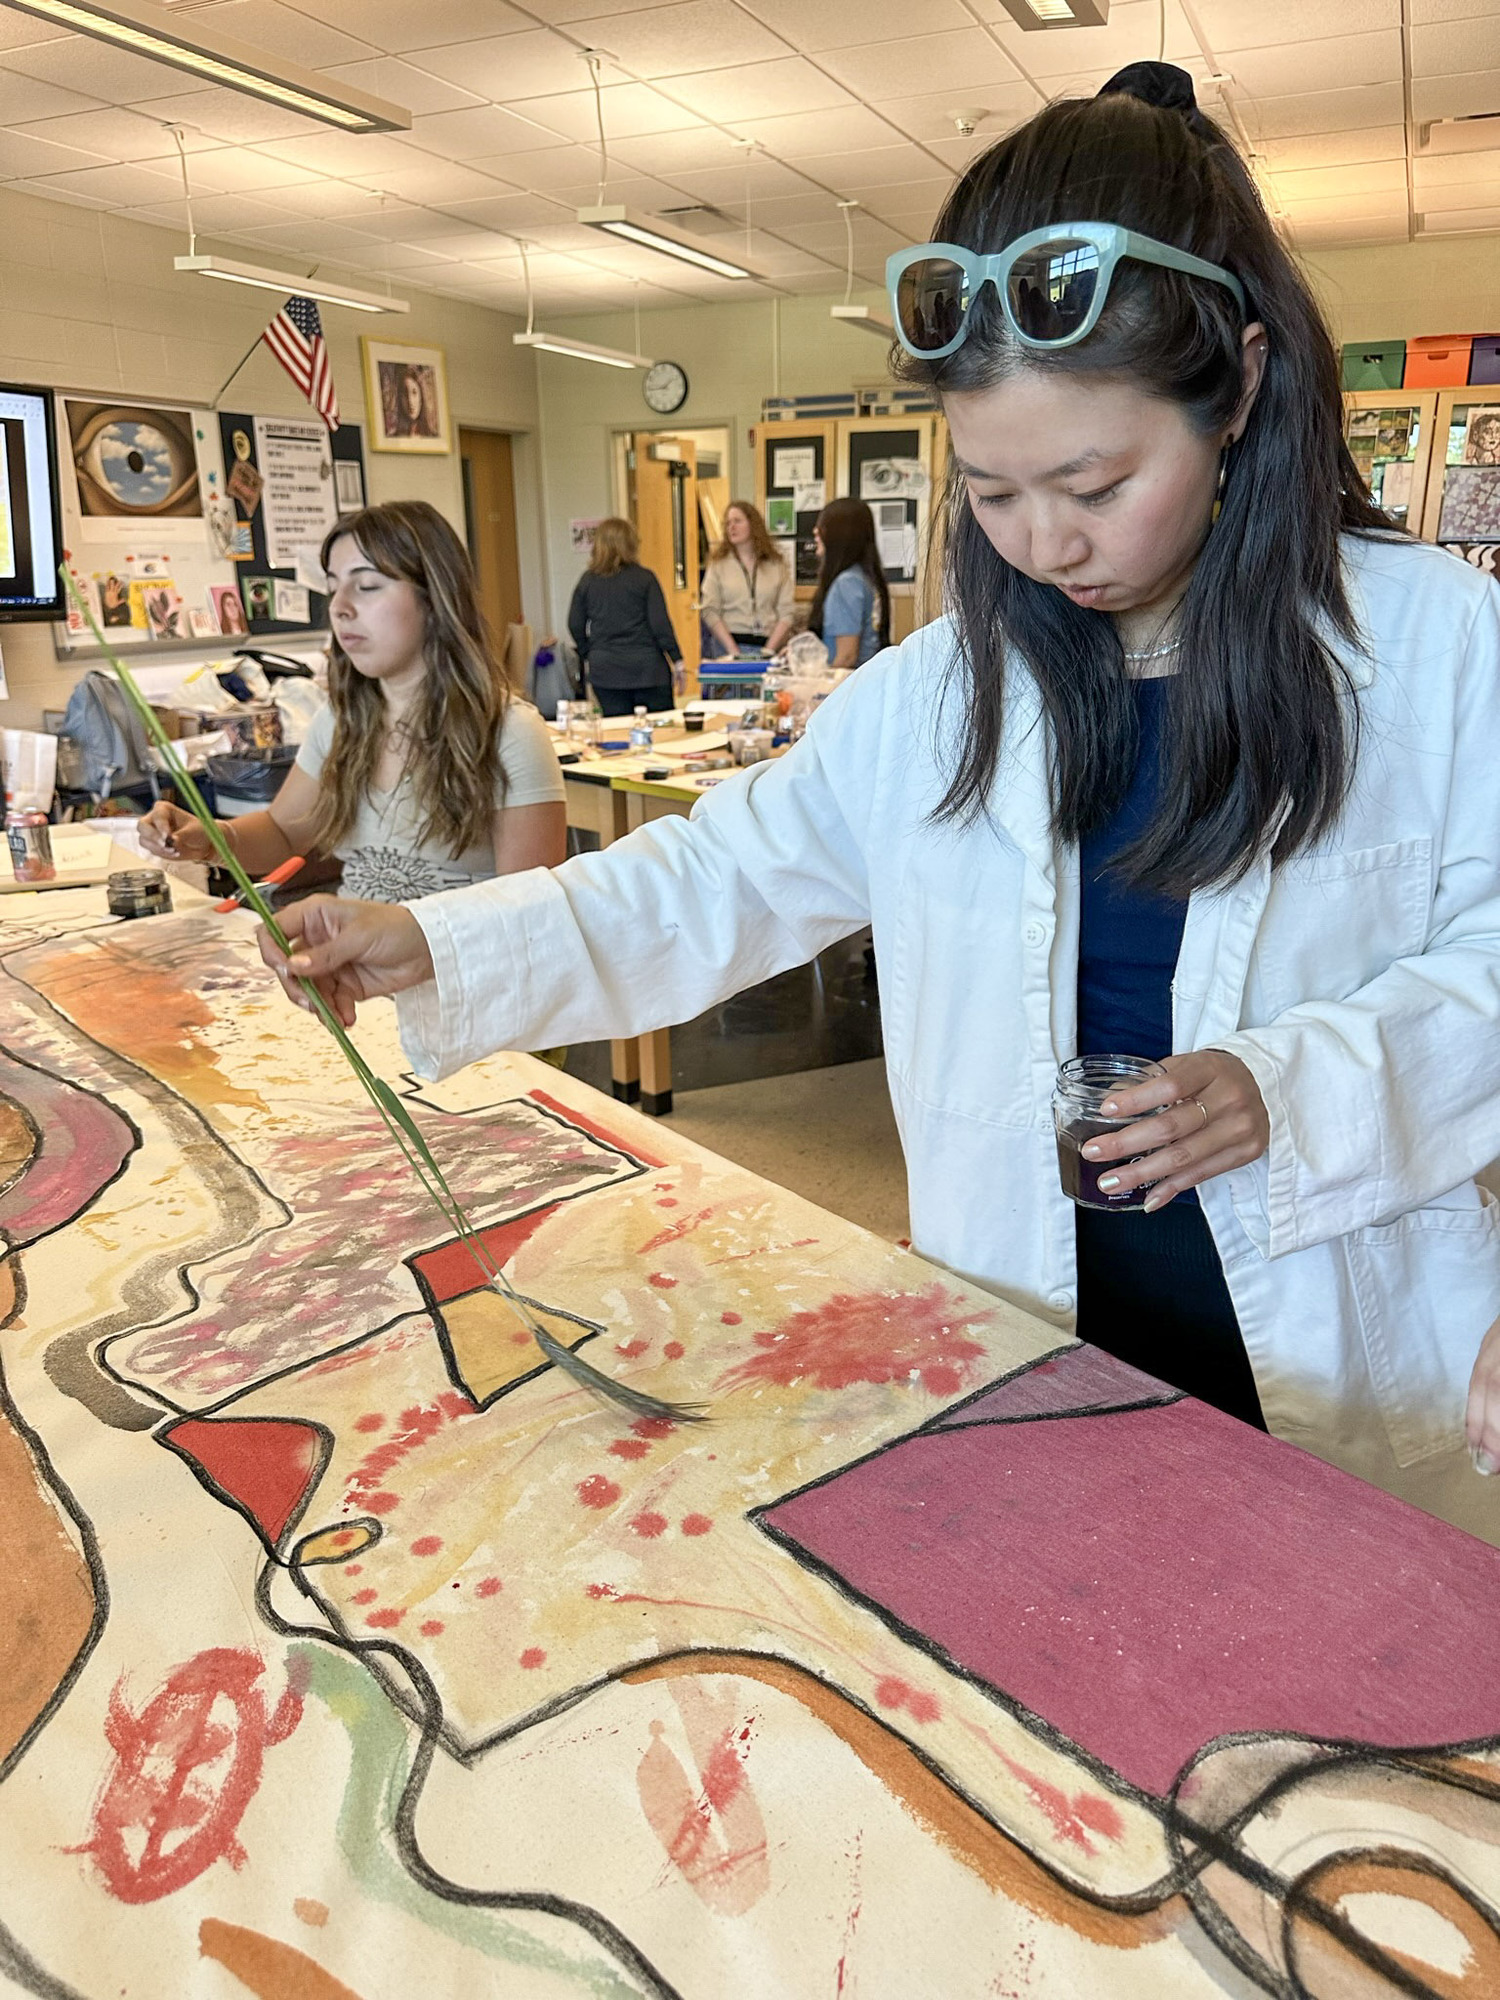 Artist Beau Bree Rhee works with a group of East Hampton High School students on their piece for 